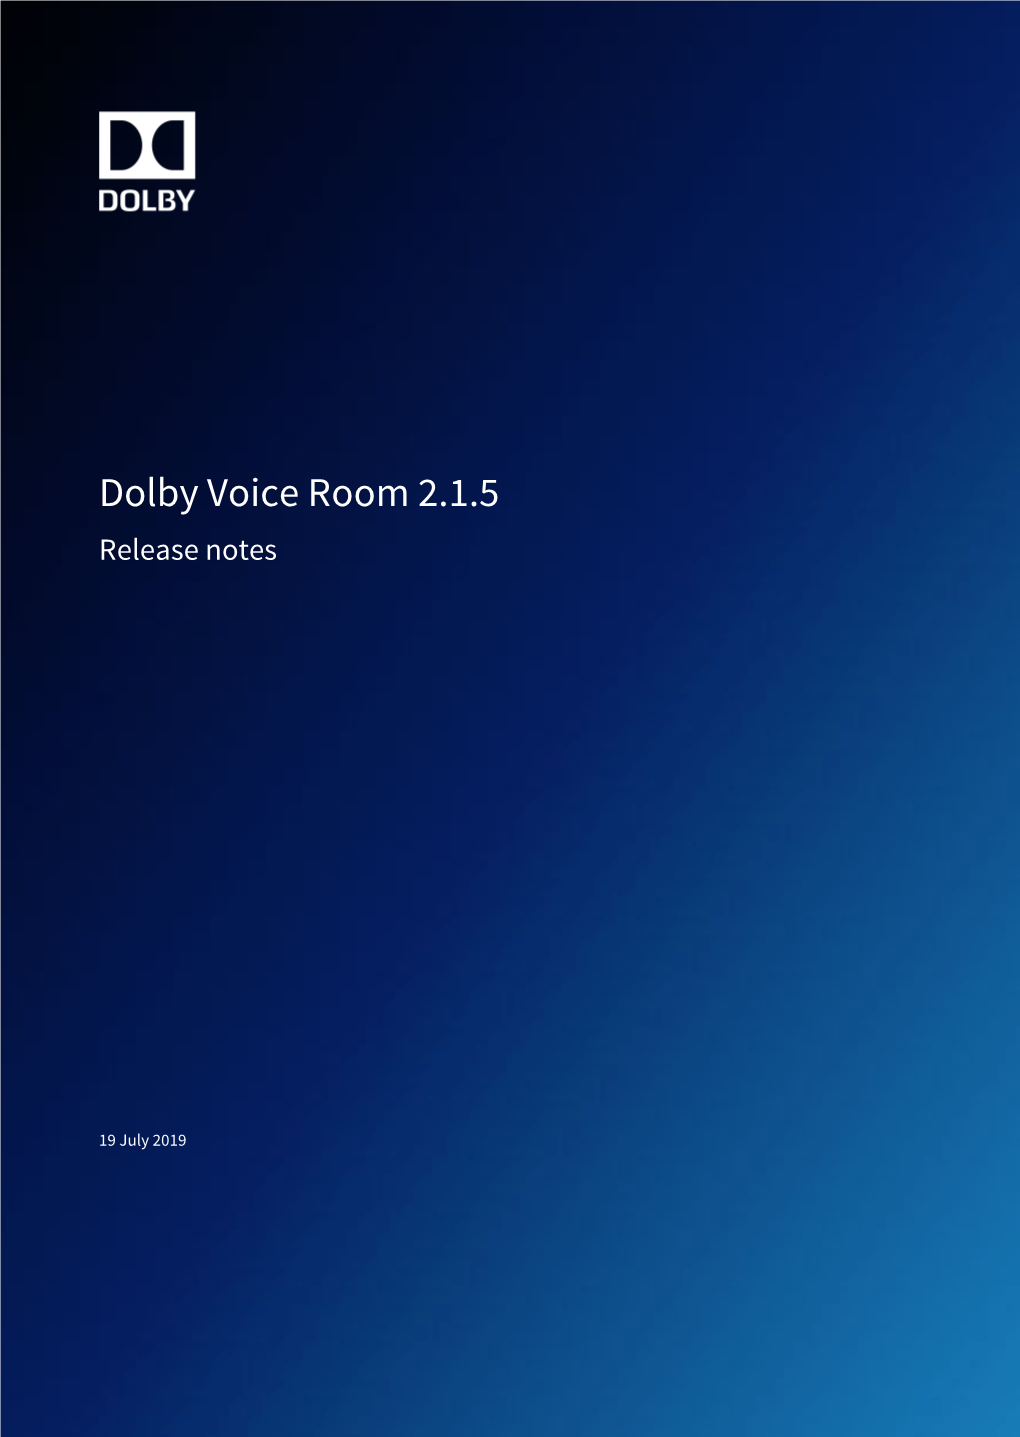 Dolby Voice Room 2.1.5 Release Notes